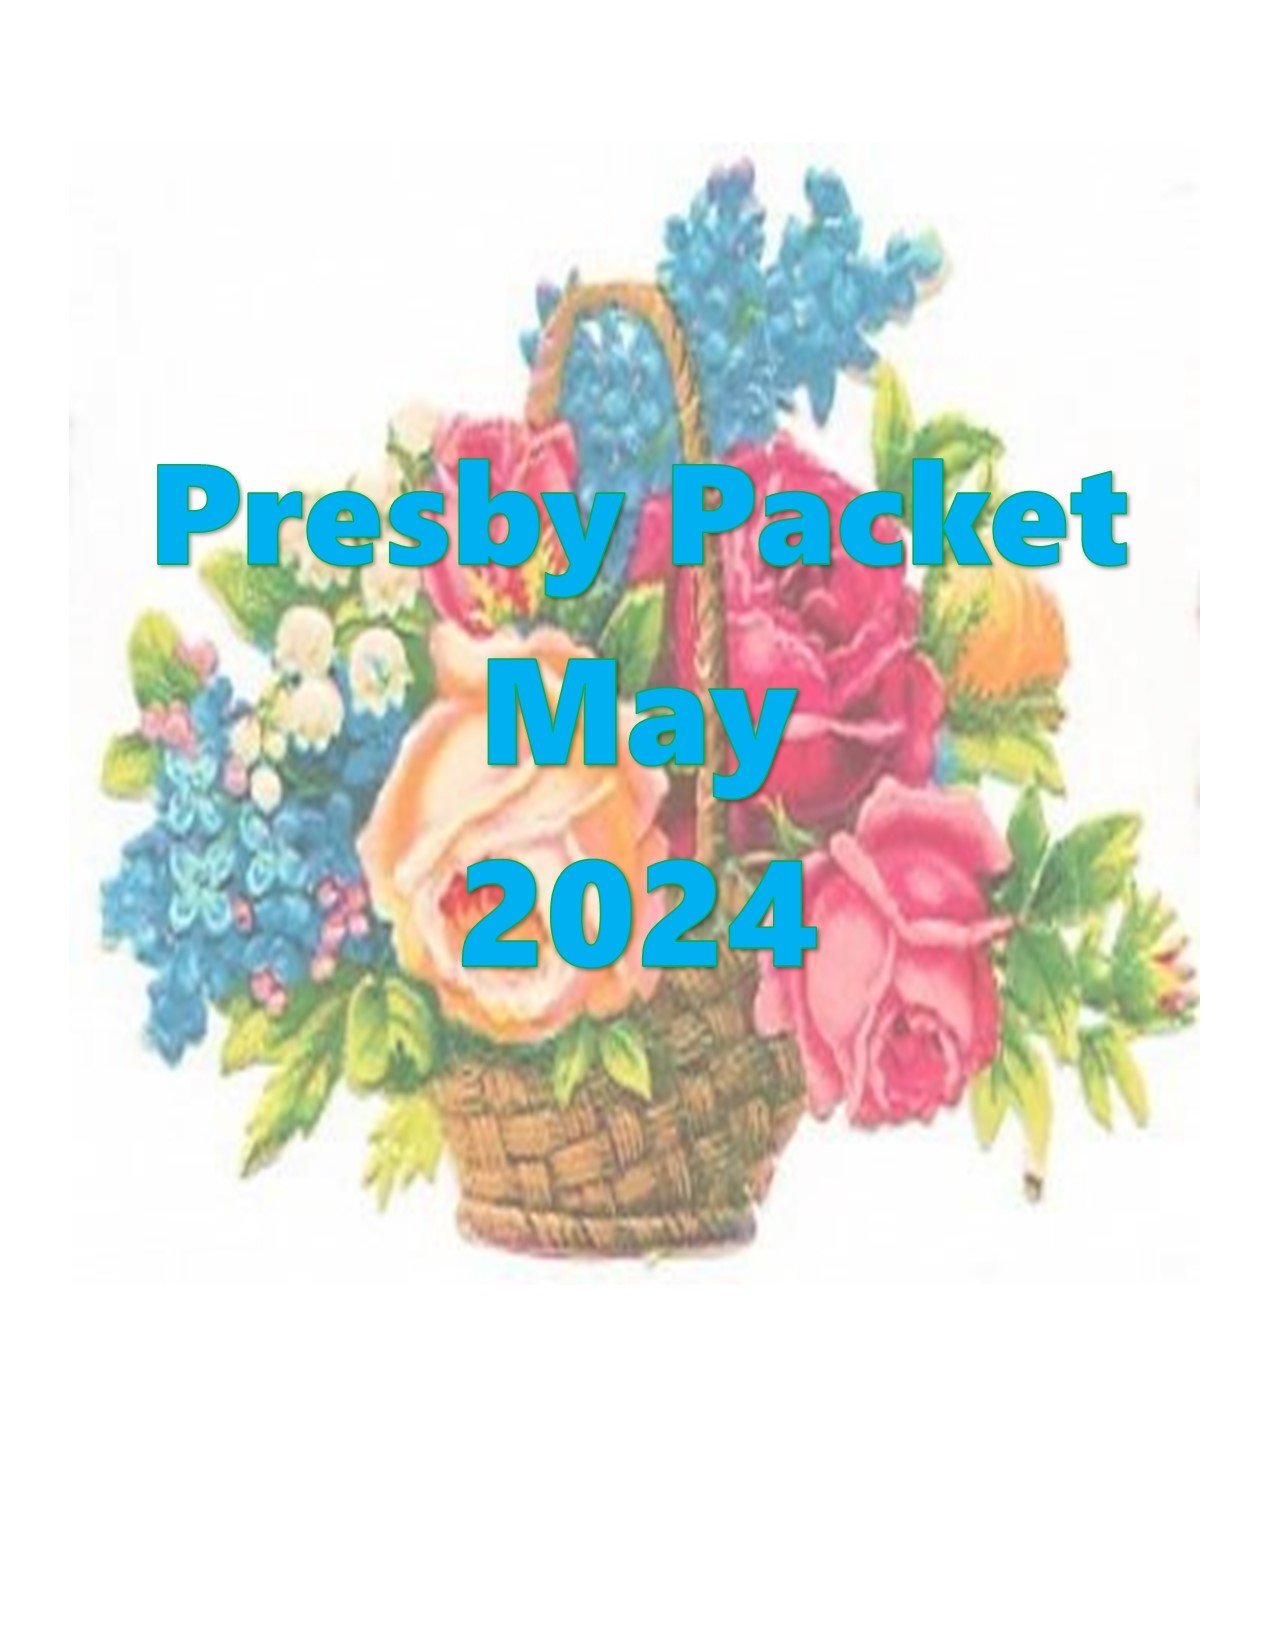 a Button -Presby Packet May 2024.jpg